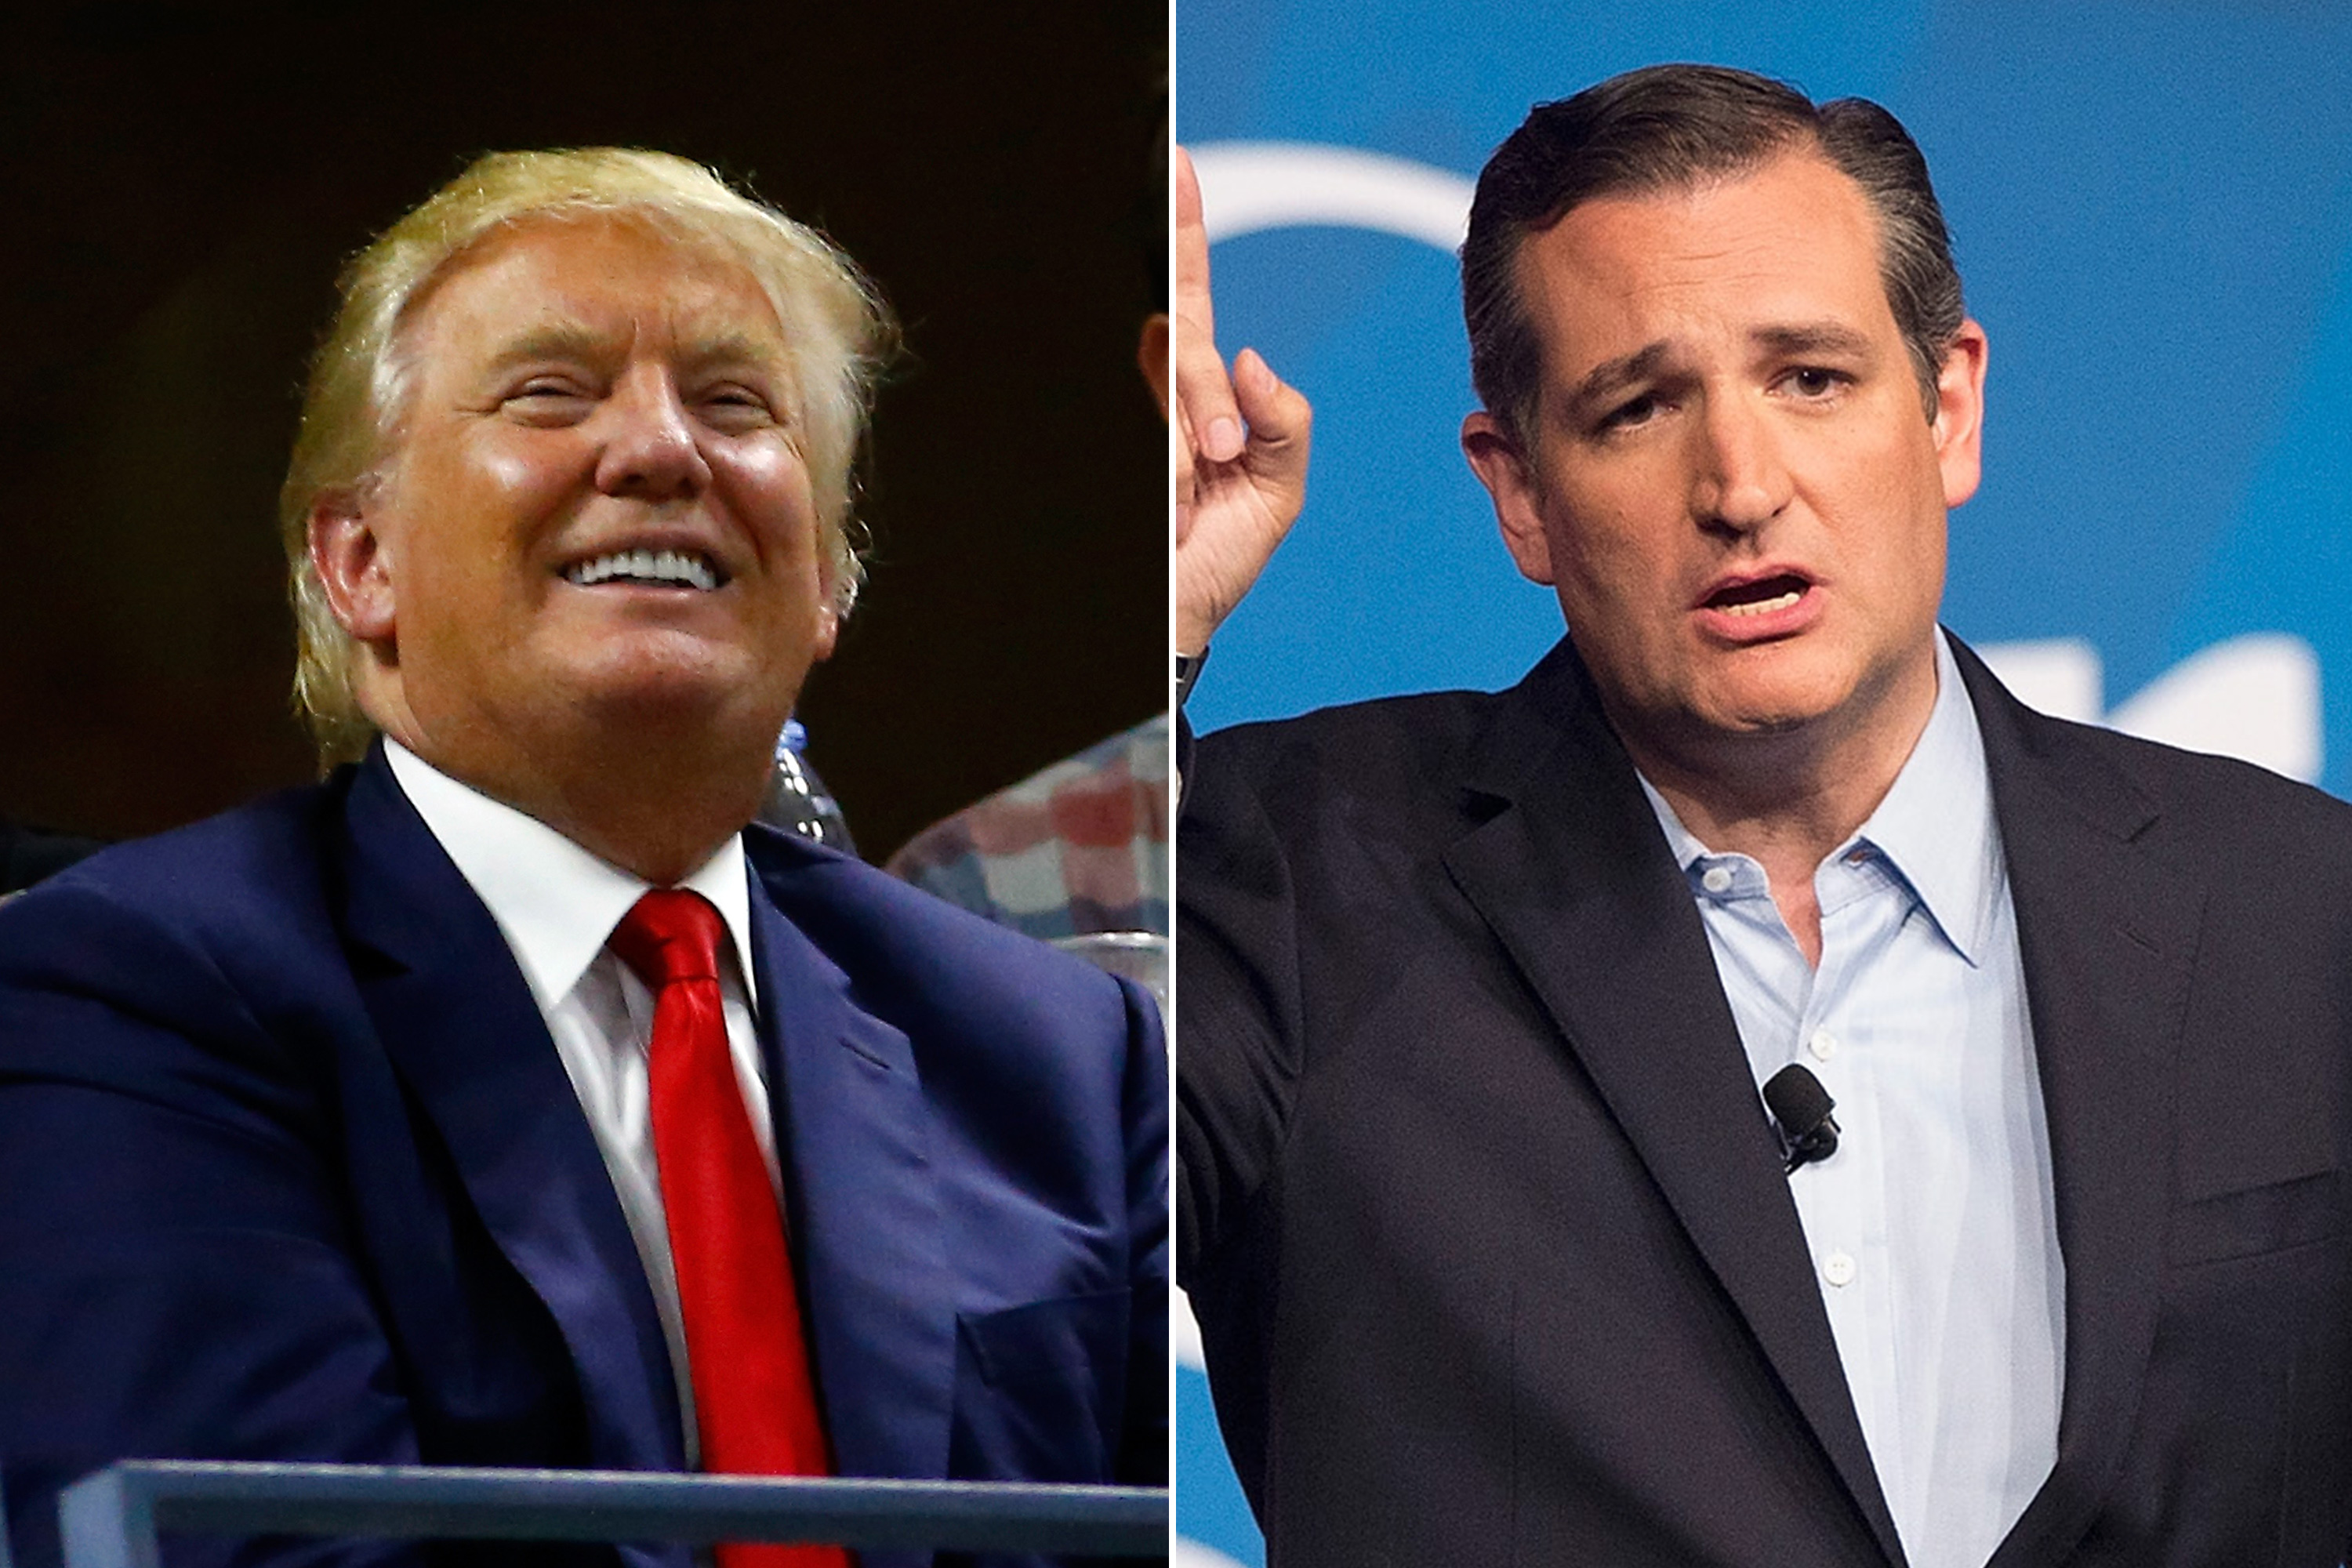 <i>Left</i>: Donald Trump attends the 2015 US Open on Sept. 8, 2015 in New York City; <i>Right</i>: Ted Cruz speaks to supporters at his Religious Liberty Rally on Aug. 21, 2015 in Des Moines, Iowa. (Al Bello—Getty Images; Scott Olson—Getty Images)